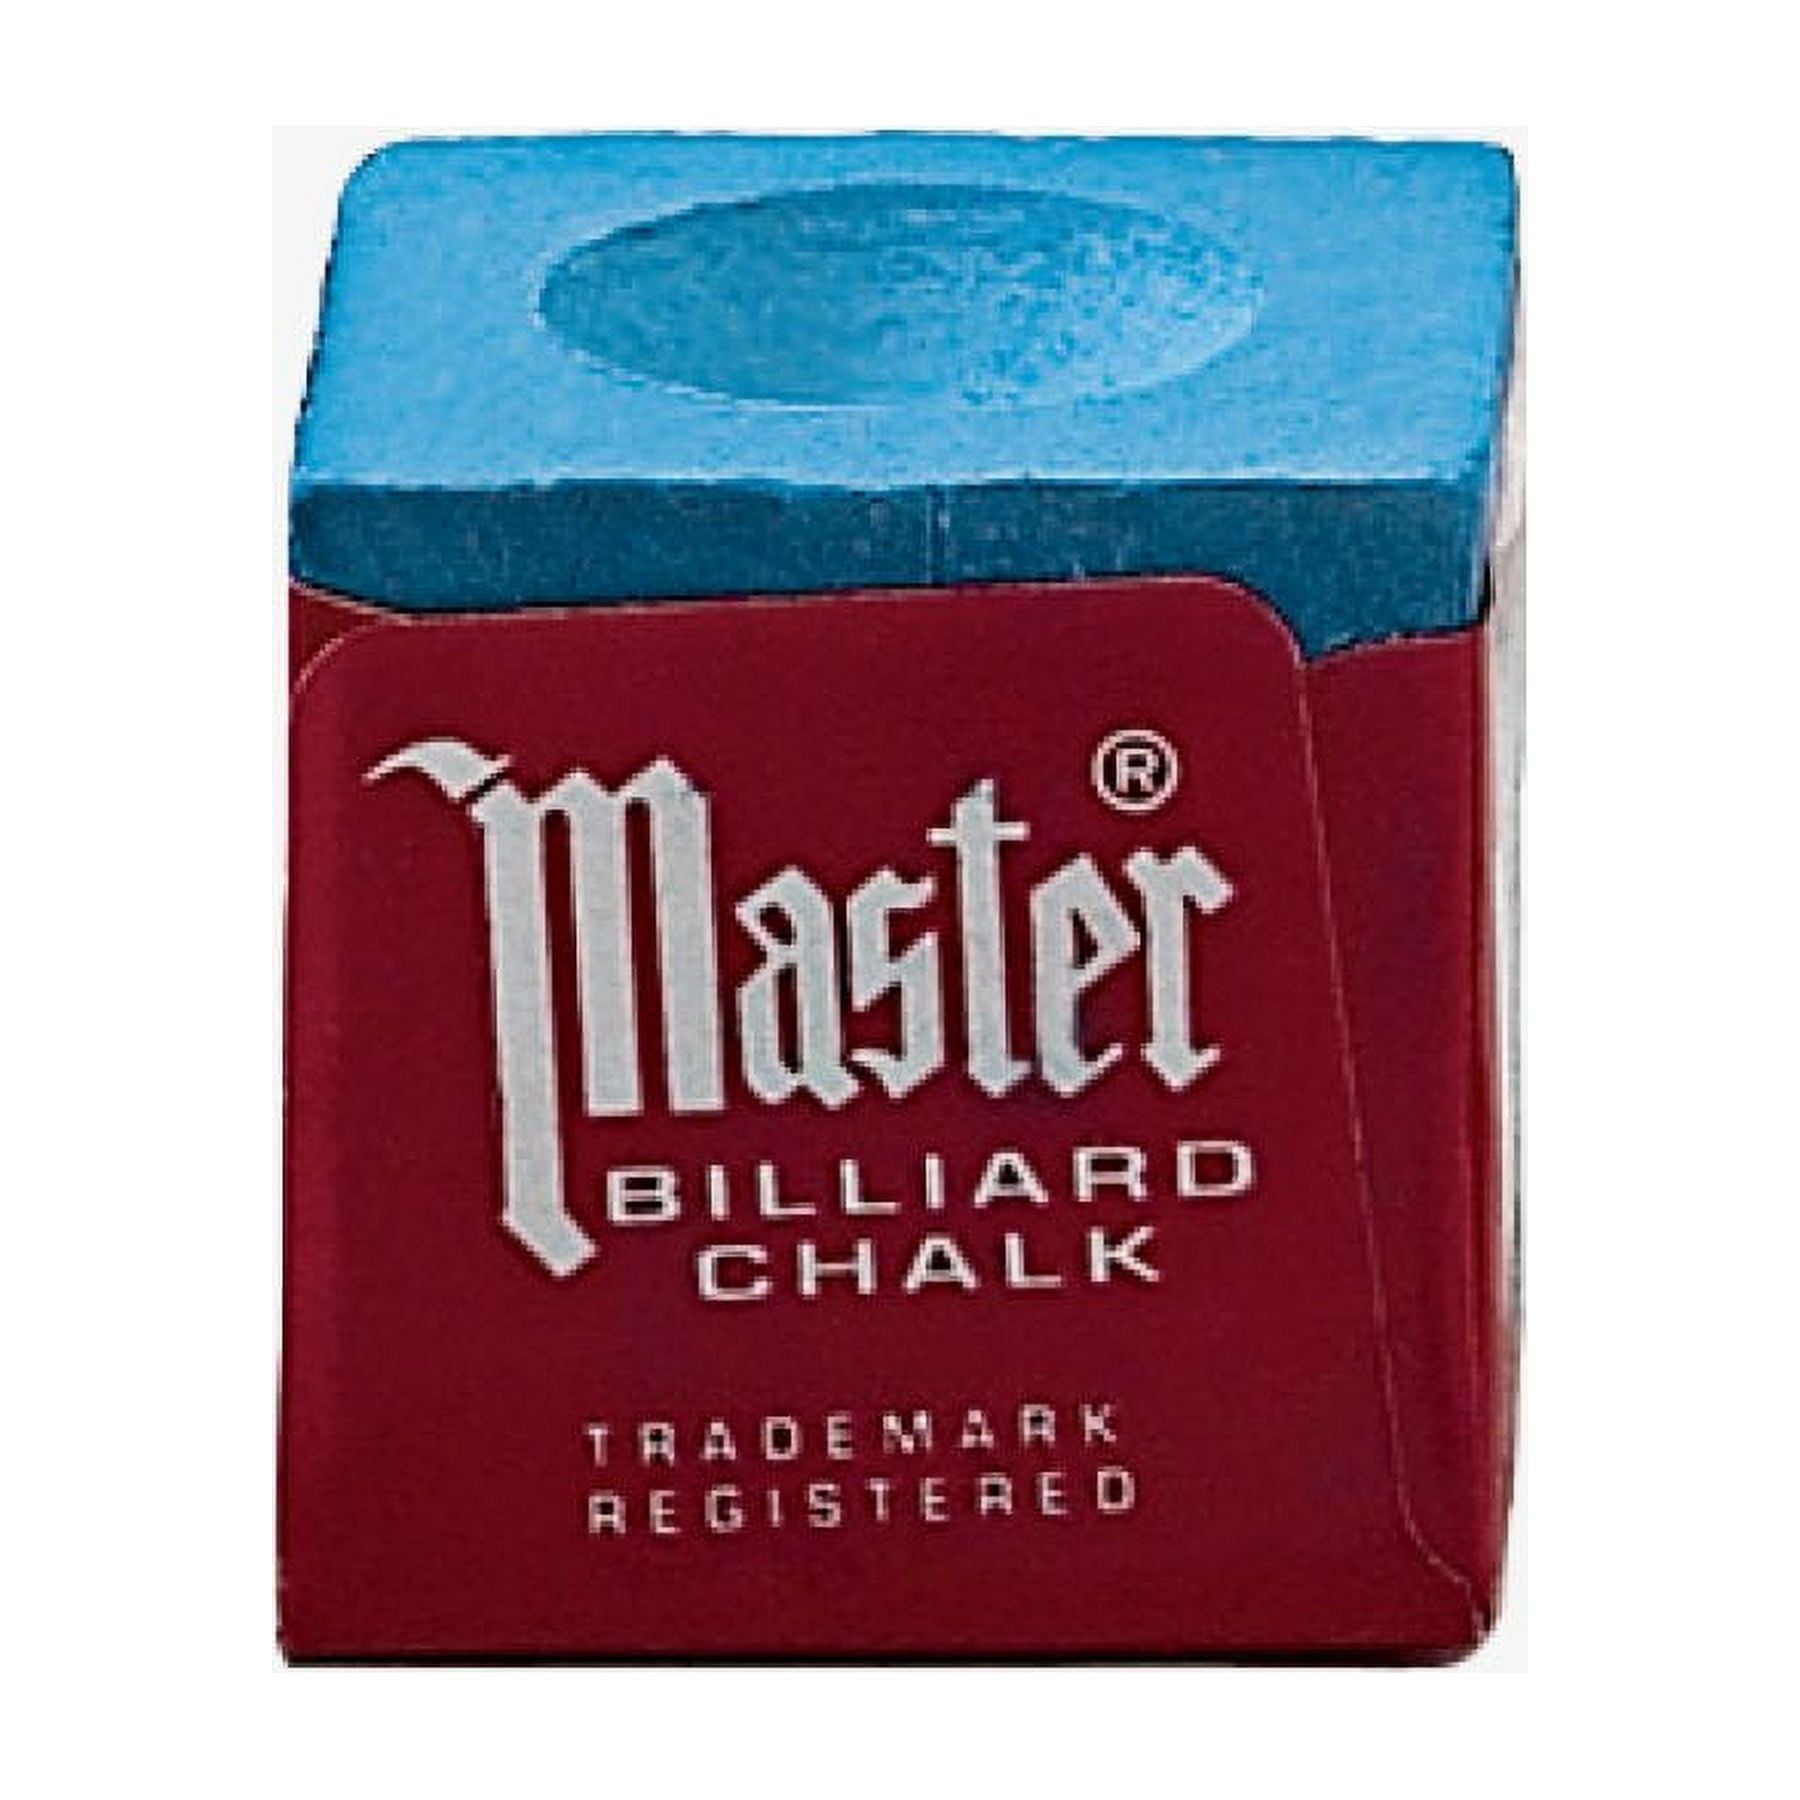 Master Cue Blue Chalk - 144 Count